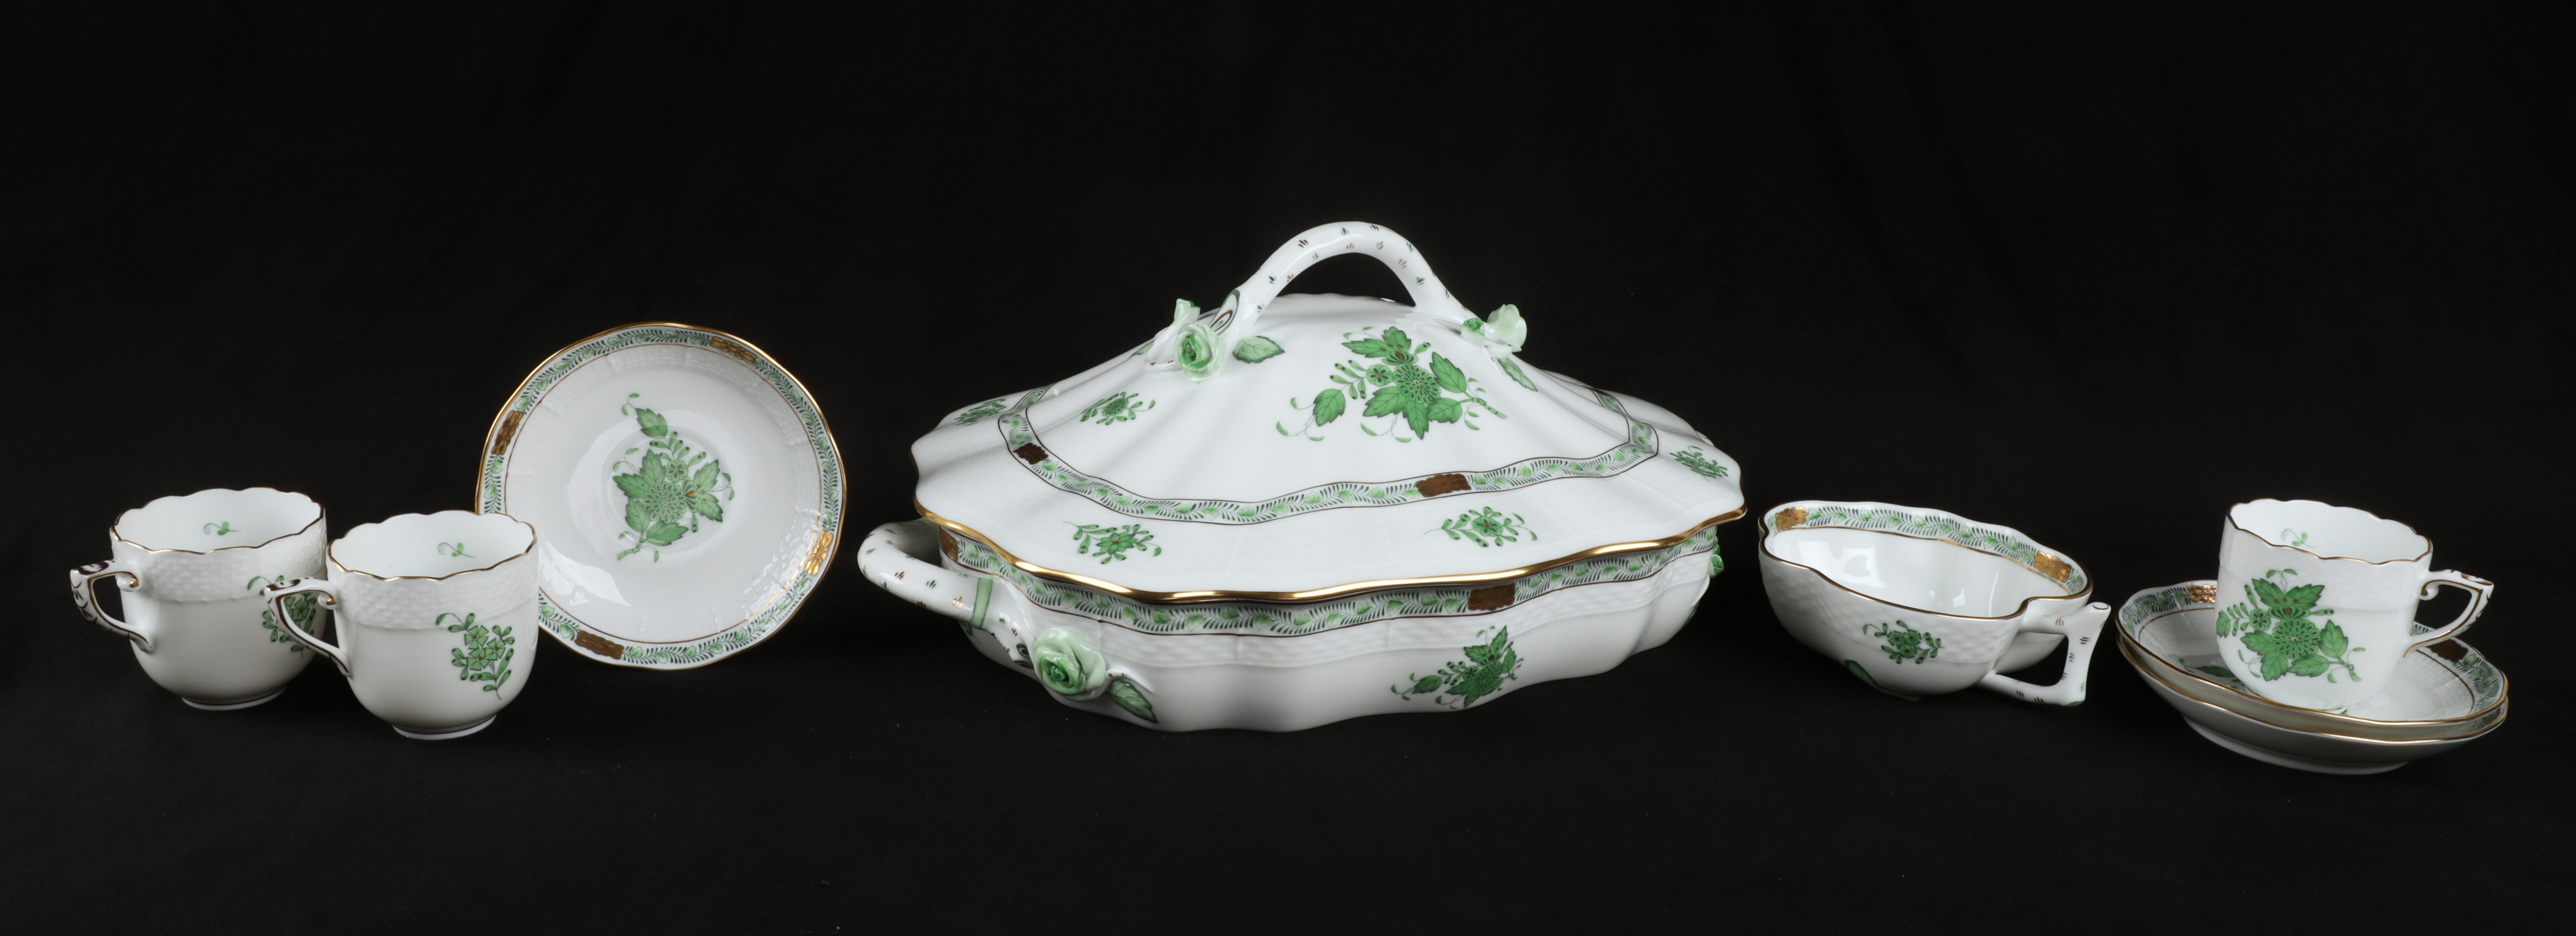 (8) Pcs Herend porcelain, Chinese